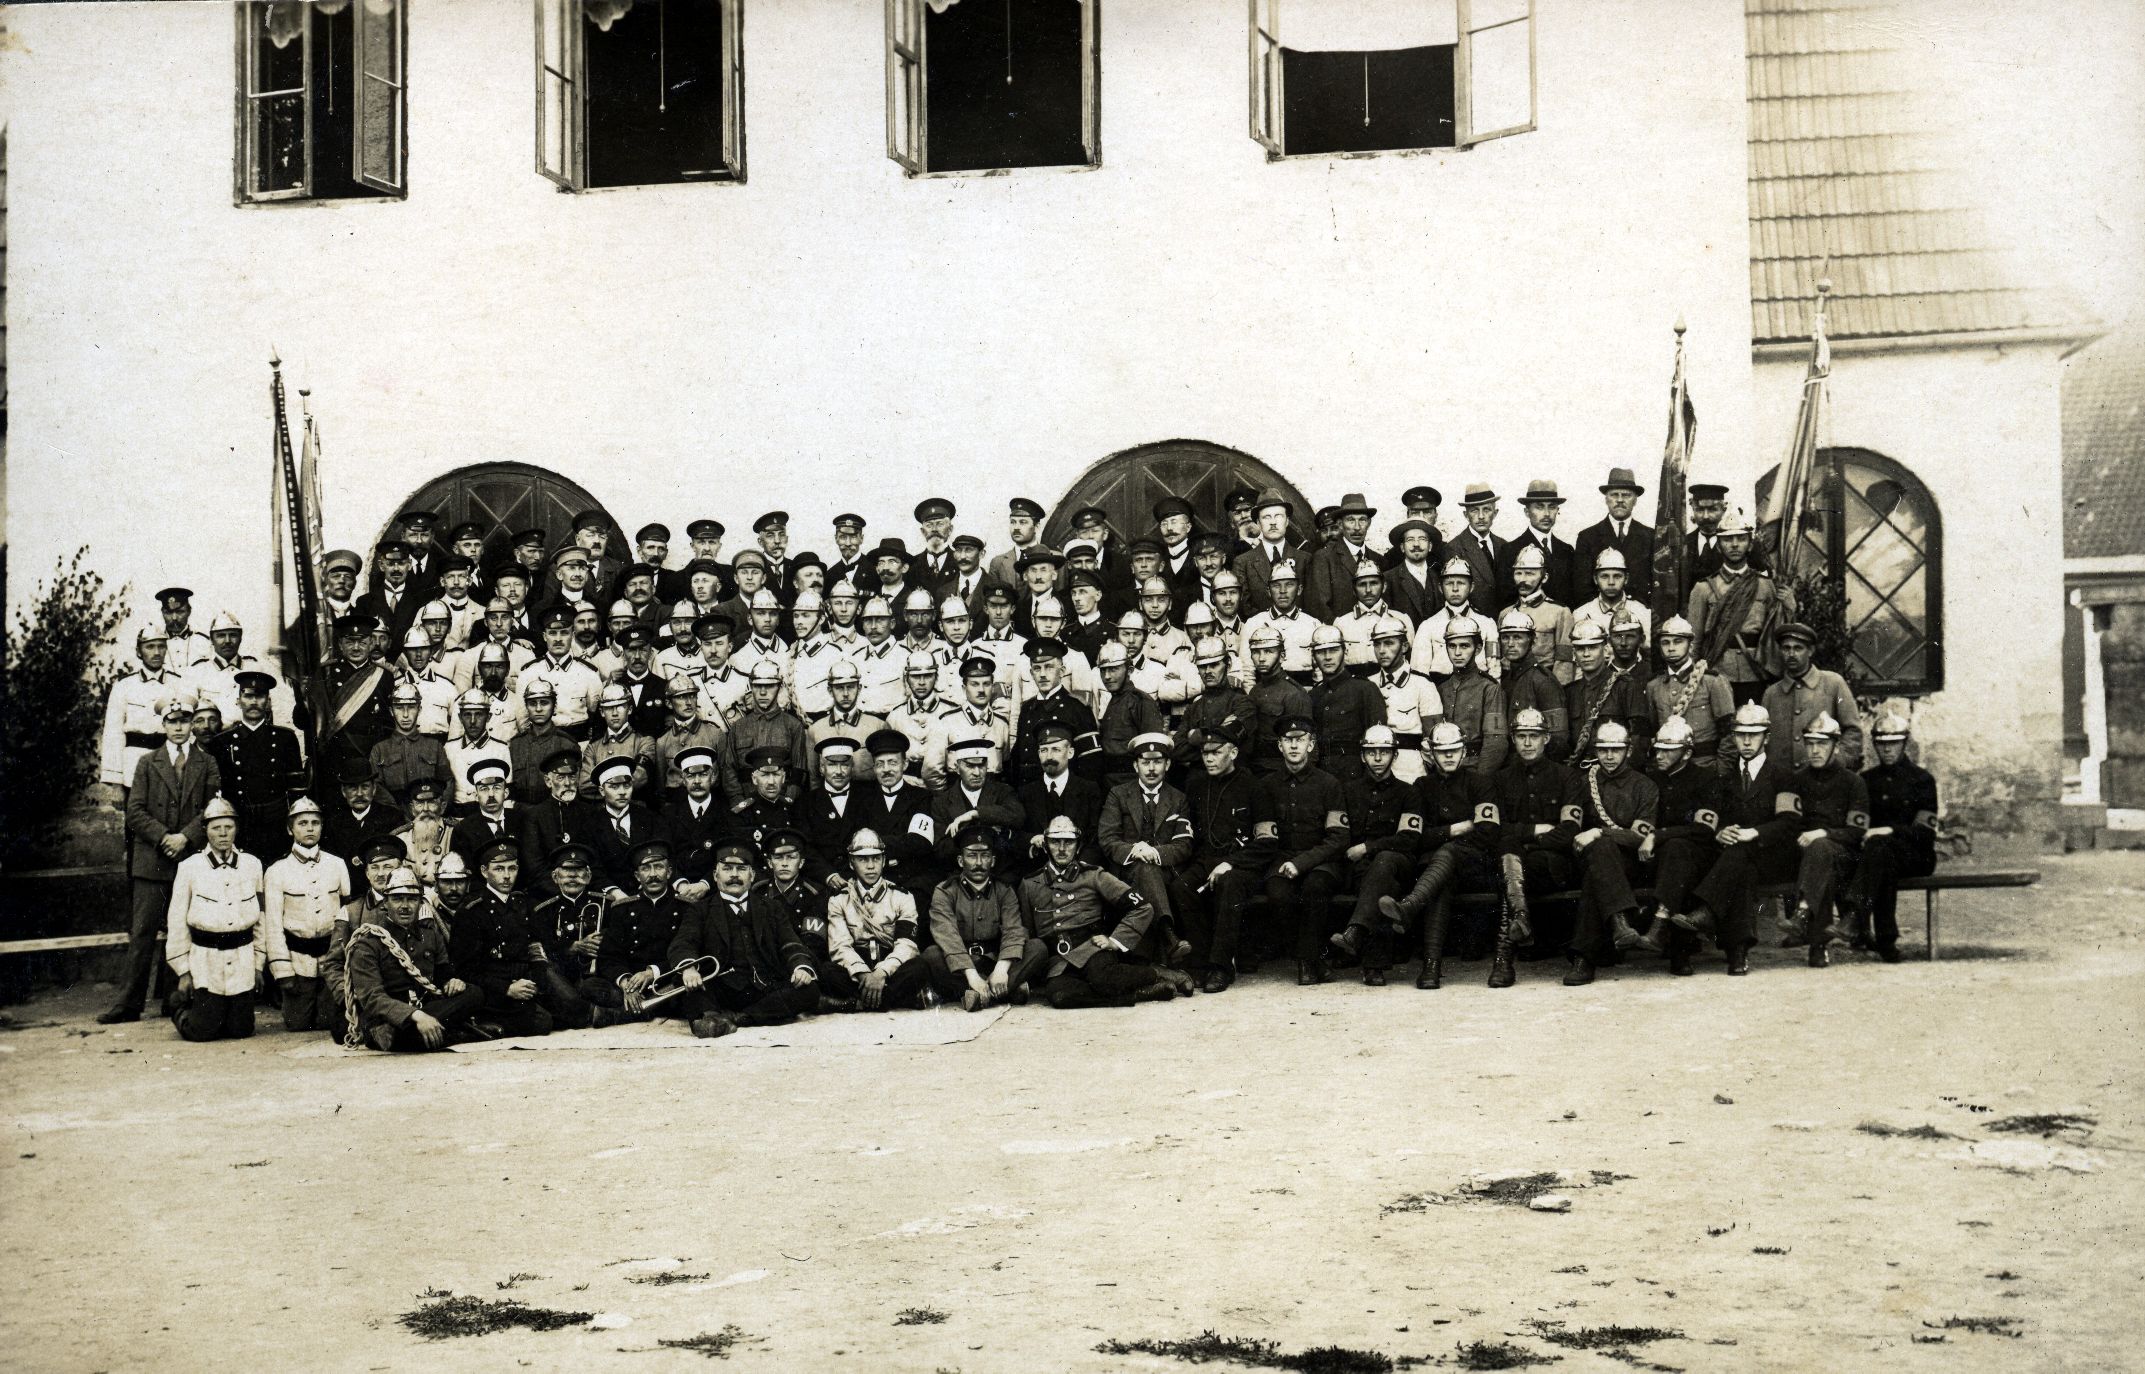 Members of the Free Fire Antiguard Society of Kuressaare in the jubilee of the 50th century